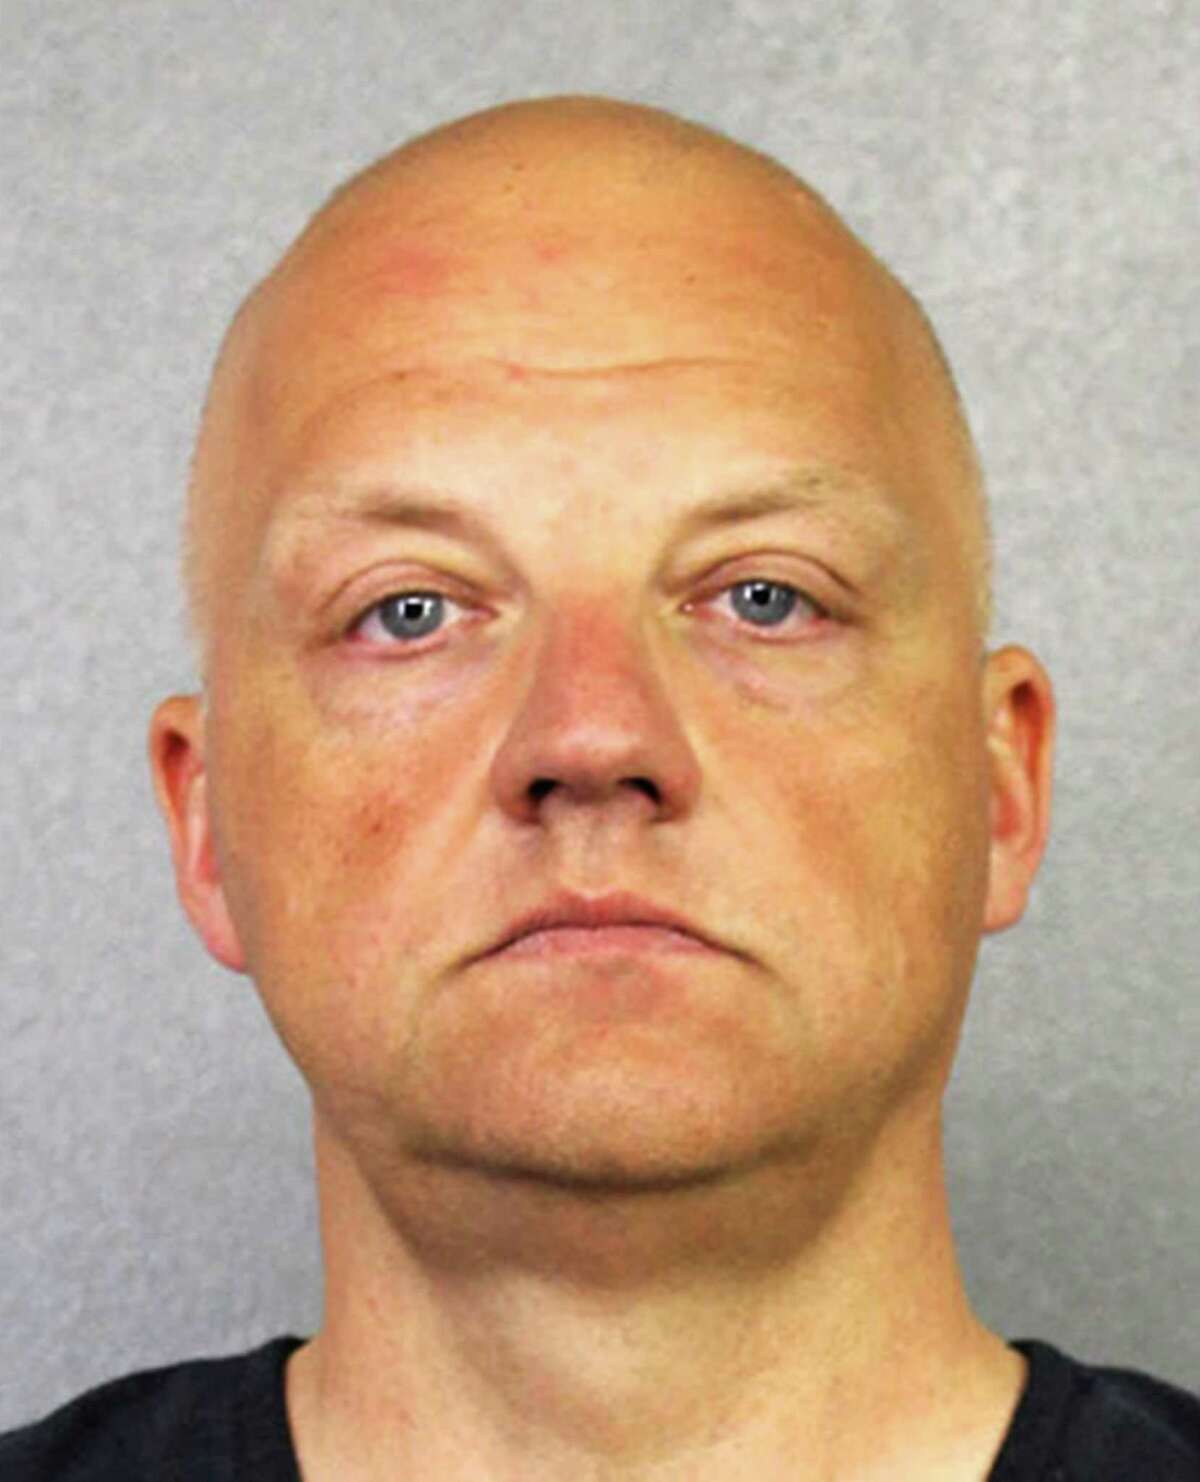 FILE - This January 2017 file photo provided by the Broward County Sheriff's Office shows German Volkswagen executive Oliver Schmidt. A court spokesman in Detroit said Tuesday, July 25, 2017, that Schmidt plans to plead guilty in the company's U.S. emissions scandal. Schmidt will appear in federal court on Aug. 4. He's been in custody since January when he was arrested while on vacation in Miami. (Broward County Sheriff's Office via AP, File)